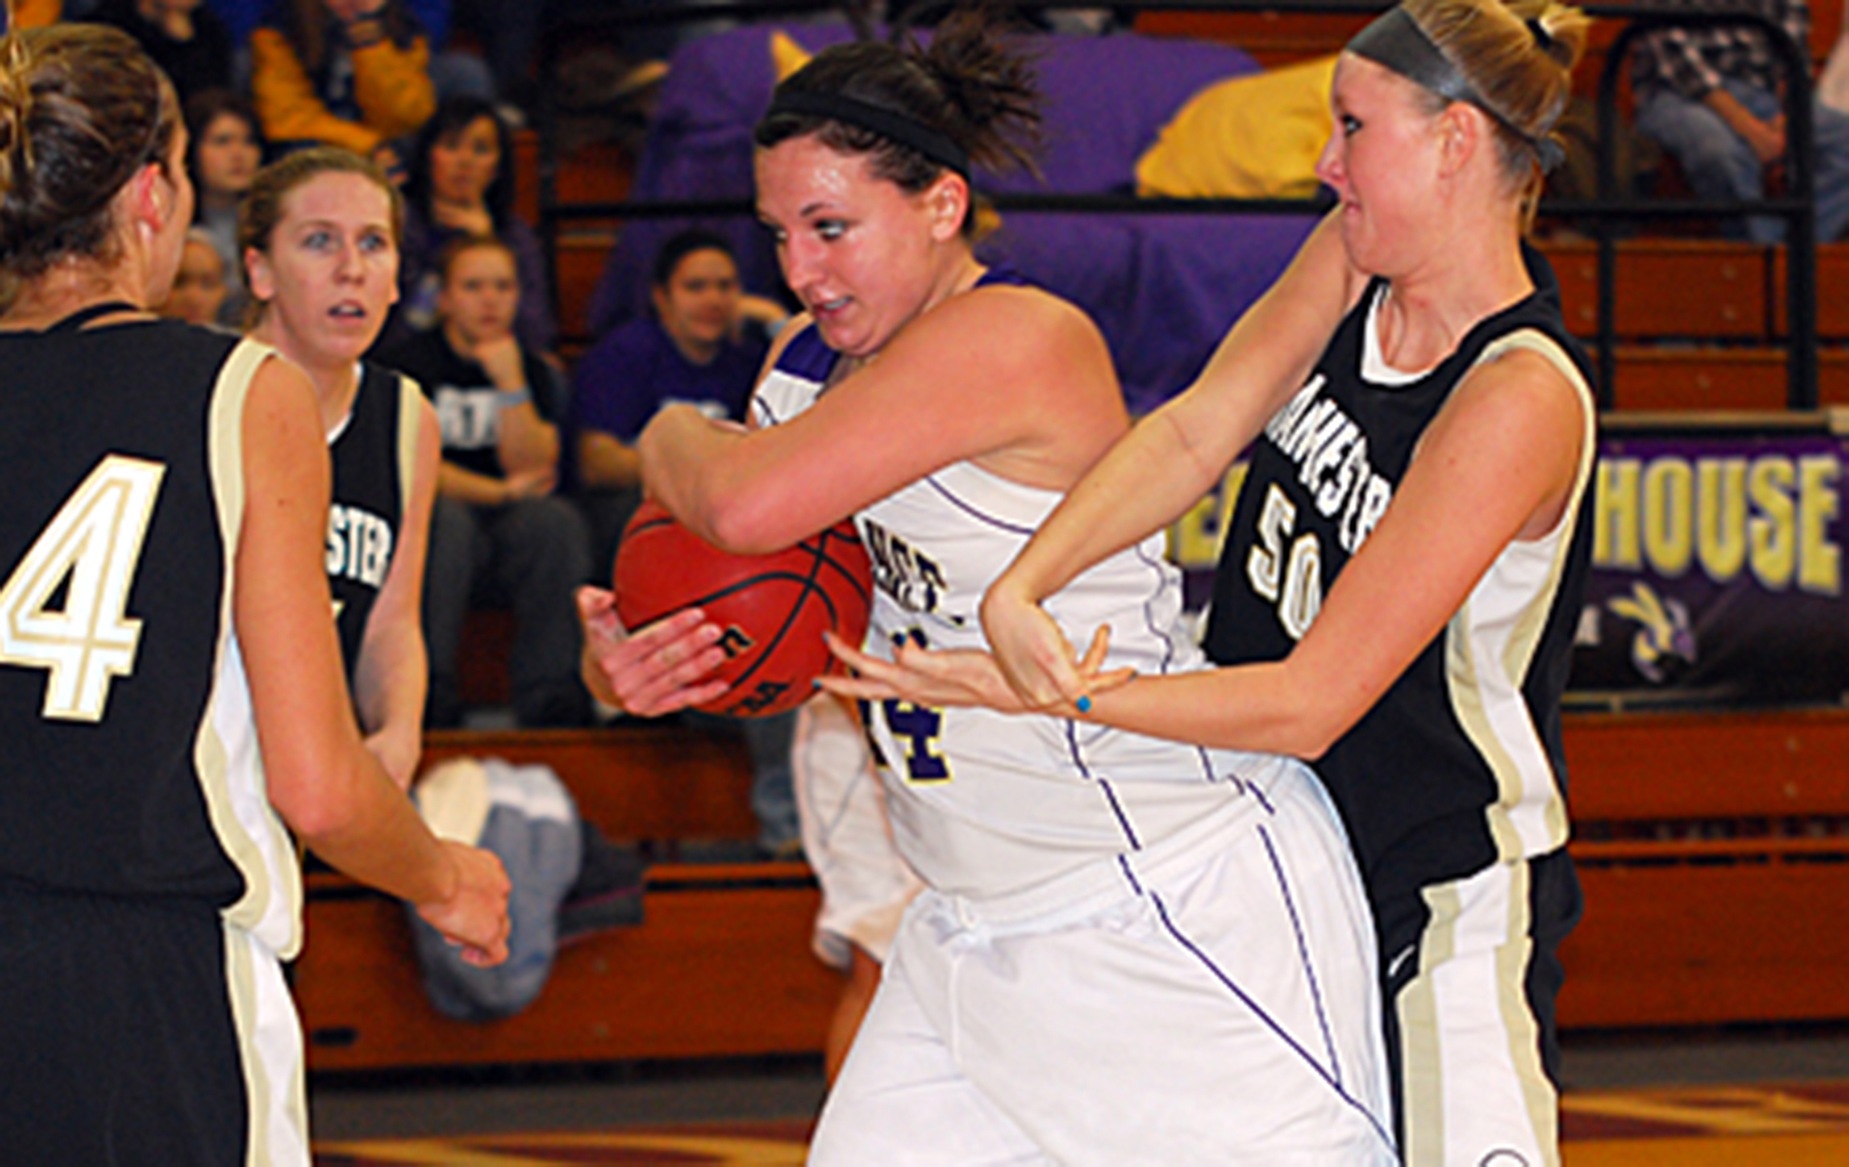 Lady Jackets Fall in High-Scoring Affair, 92-75, Against Hanover